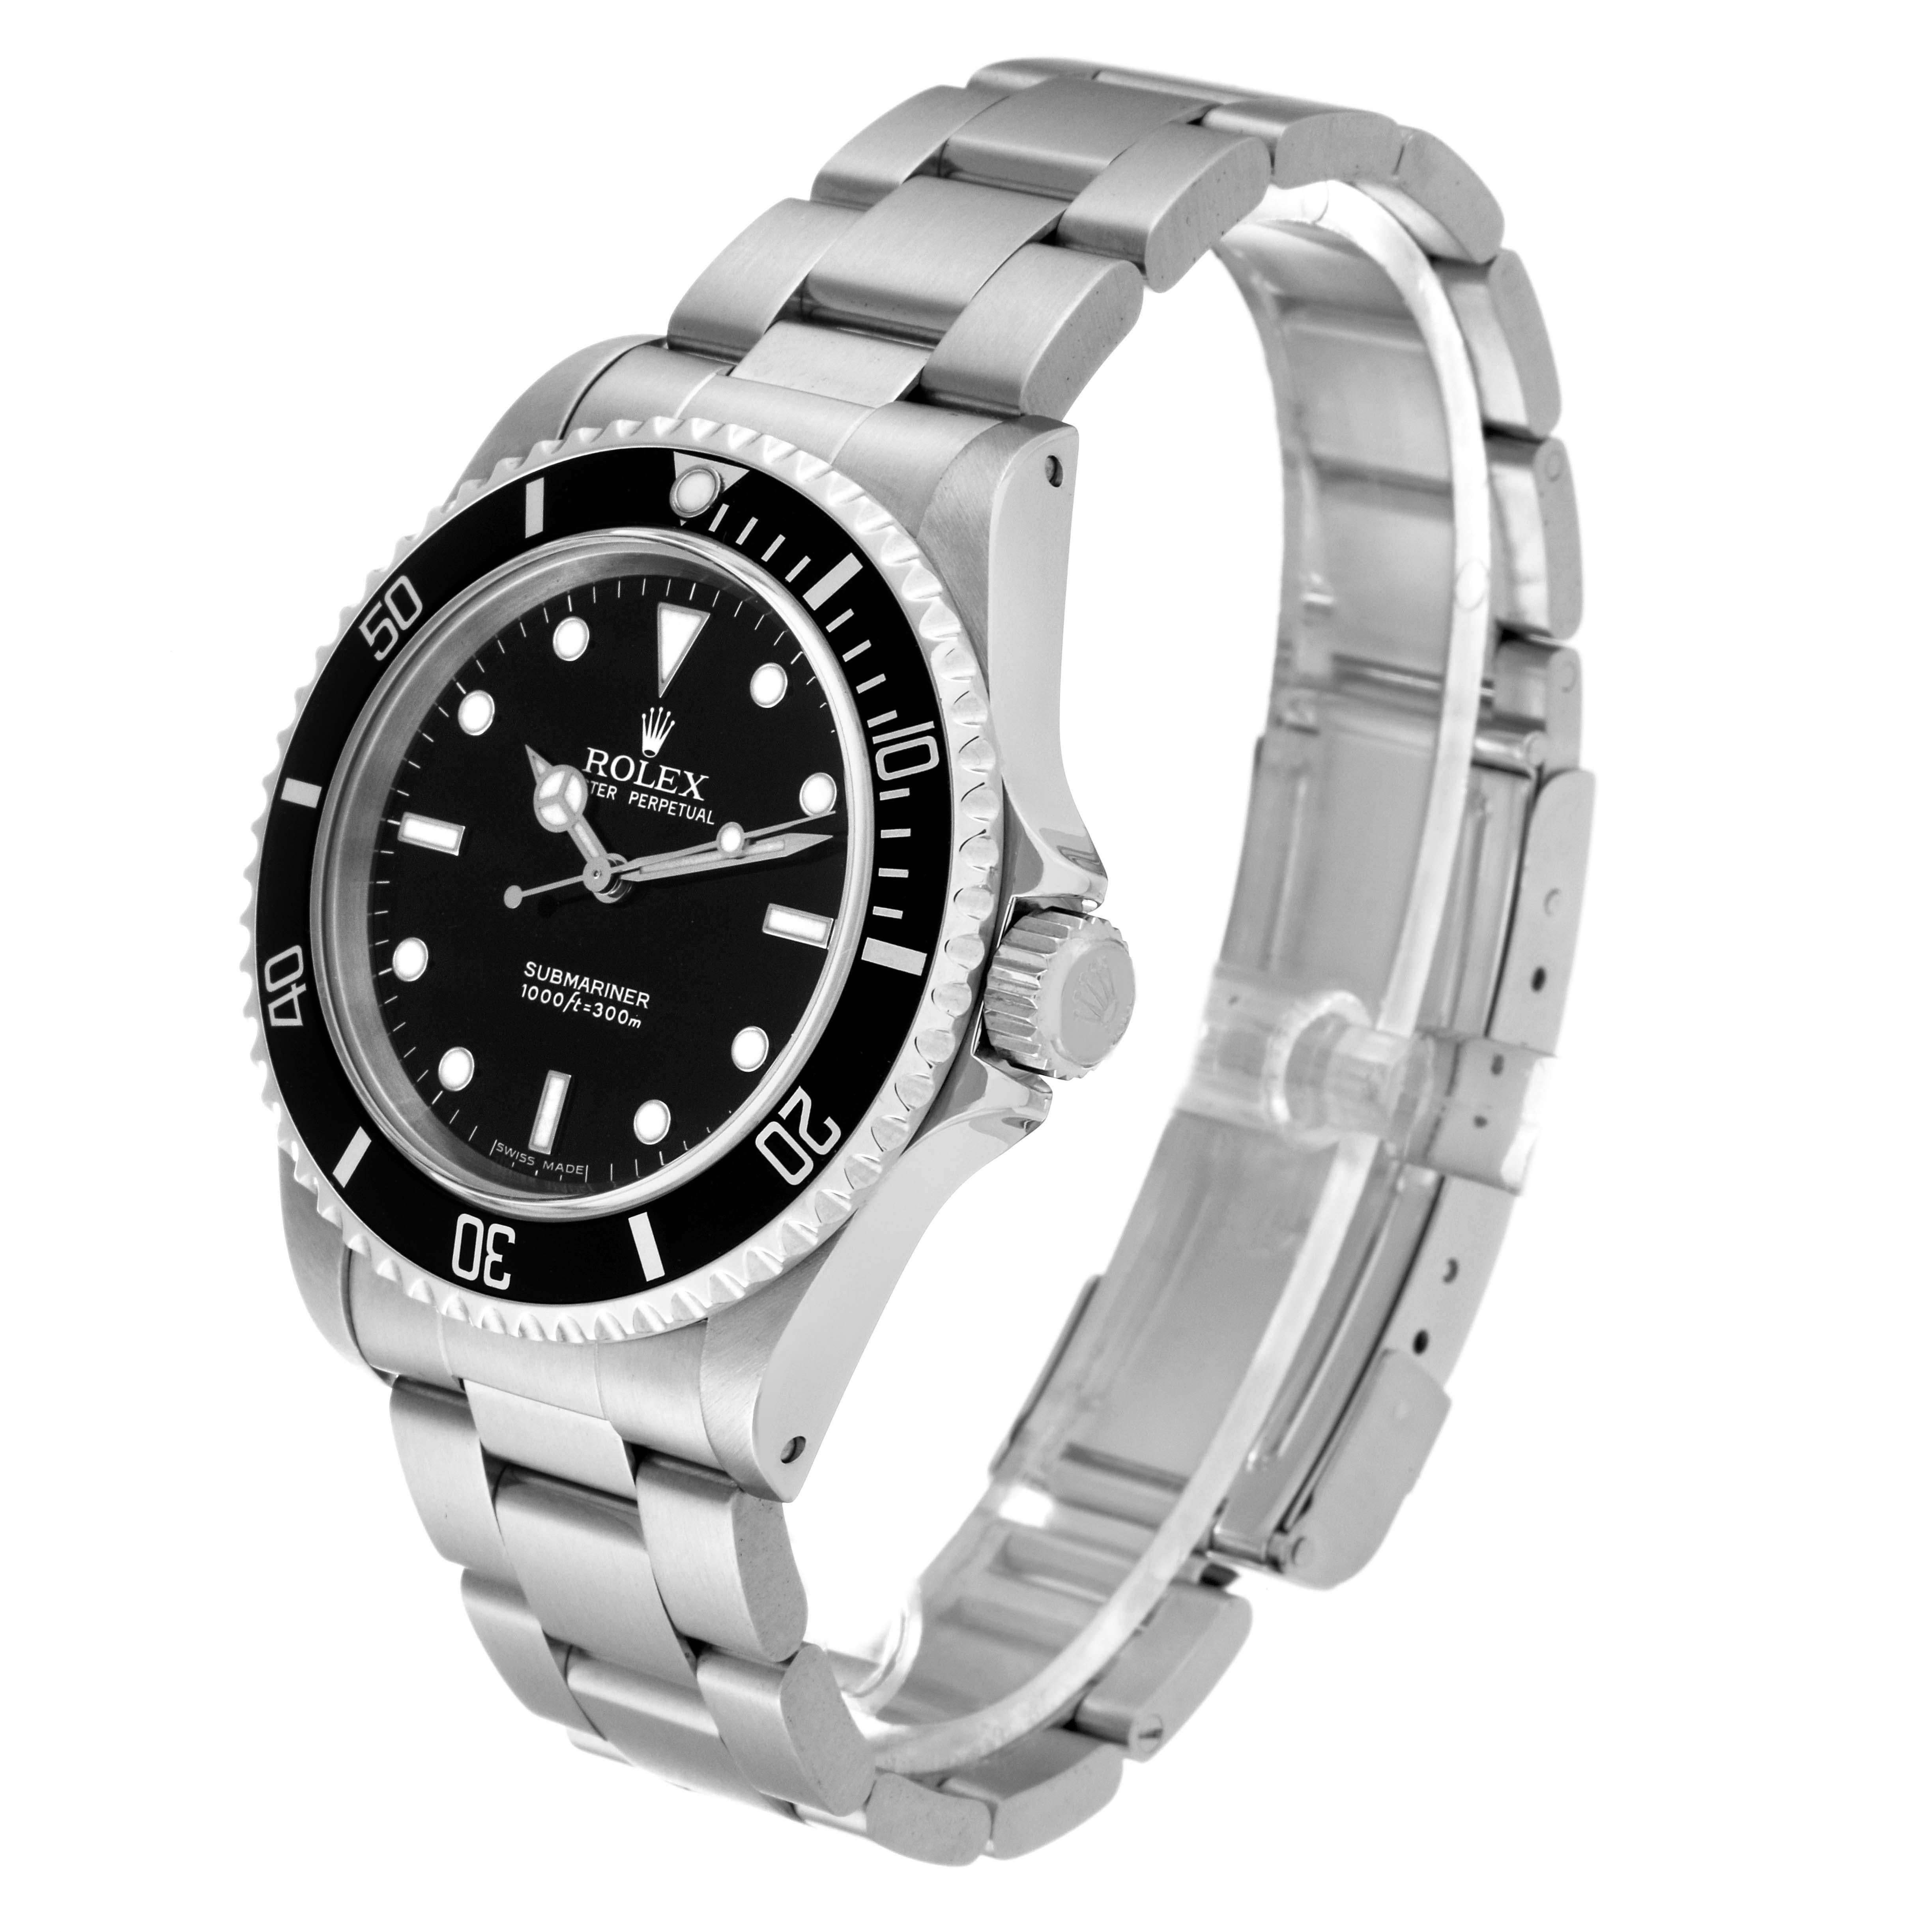 Rolex Submariner No Date 40mm 2 Liner Steel Mens Watch 14060 Box Papers 4